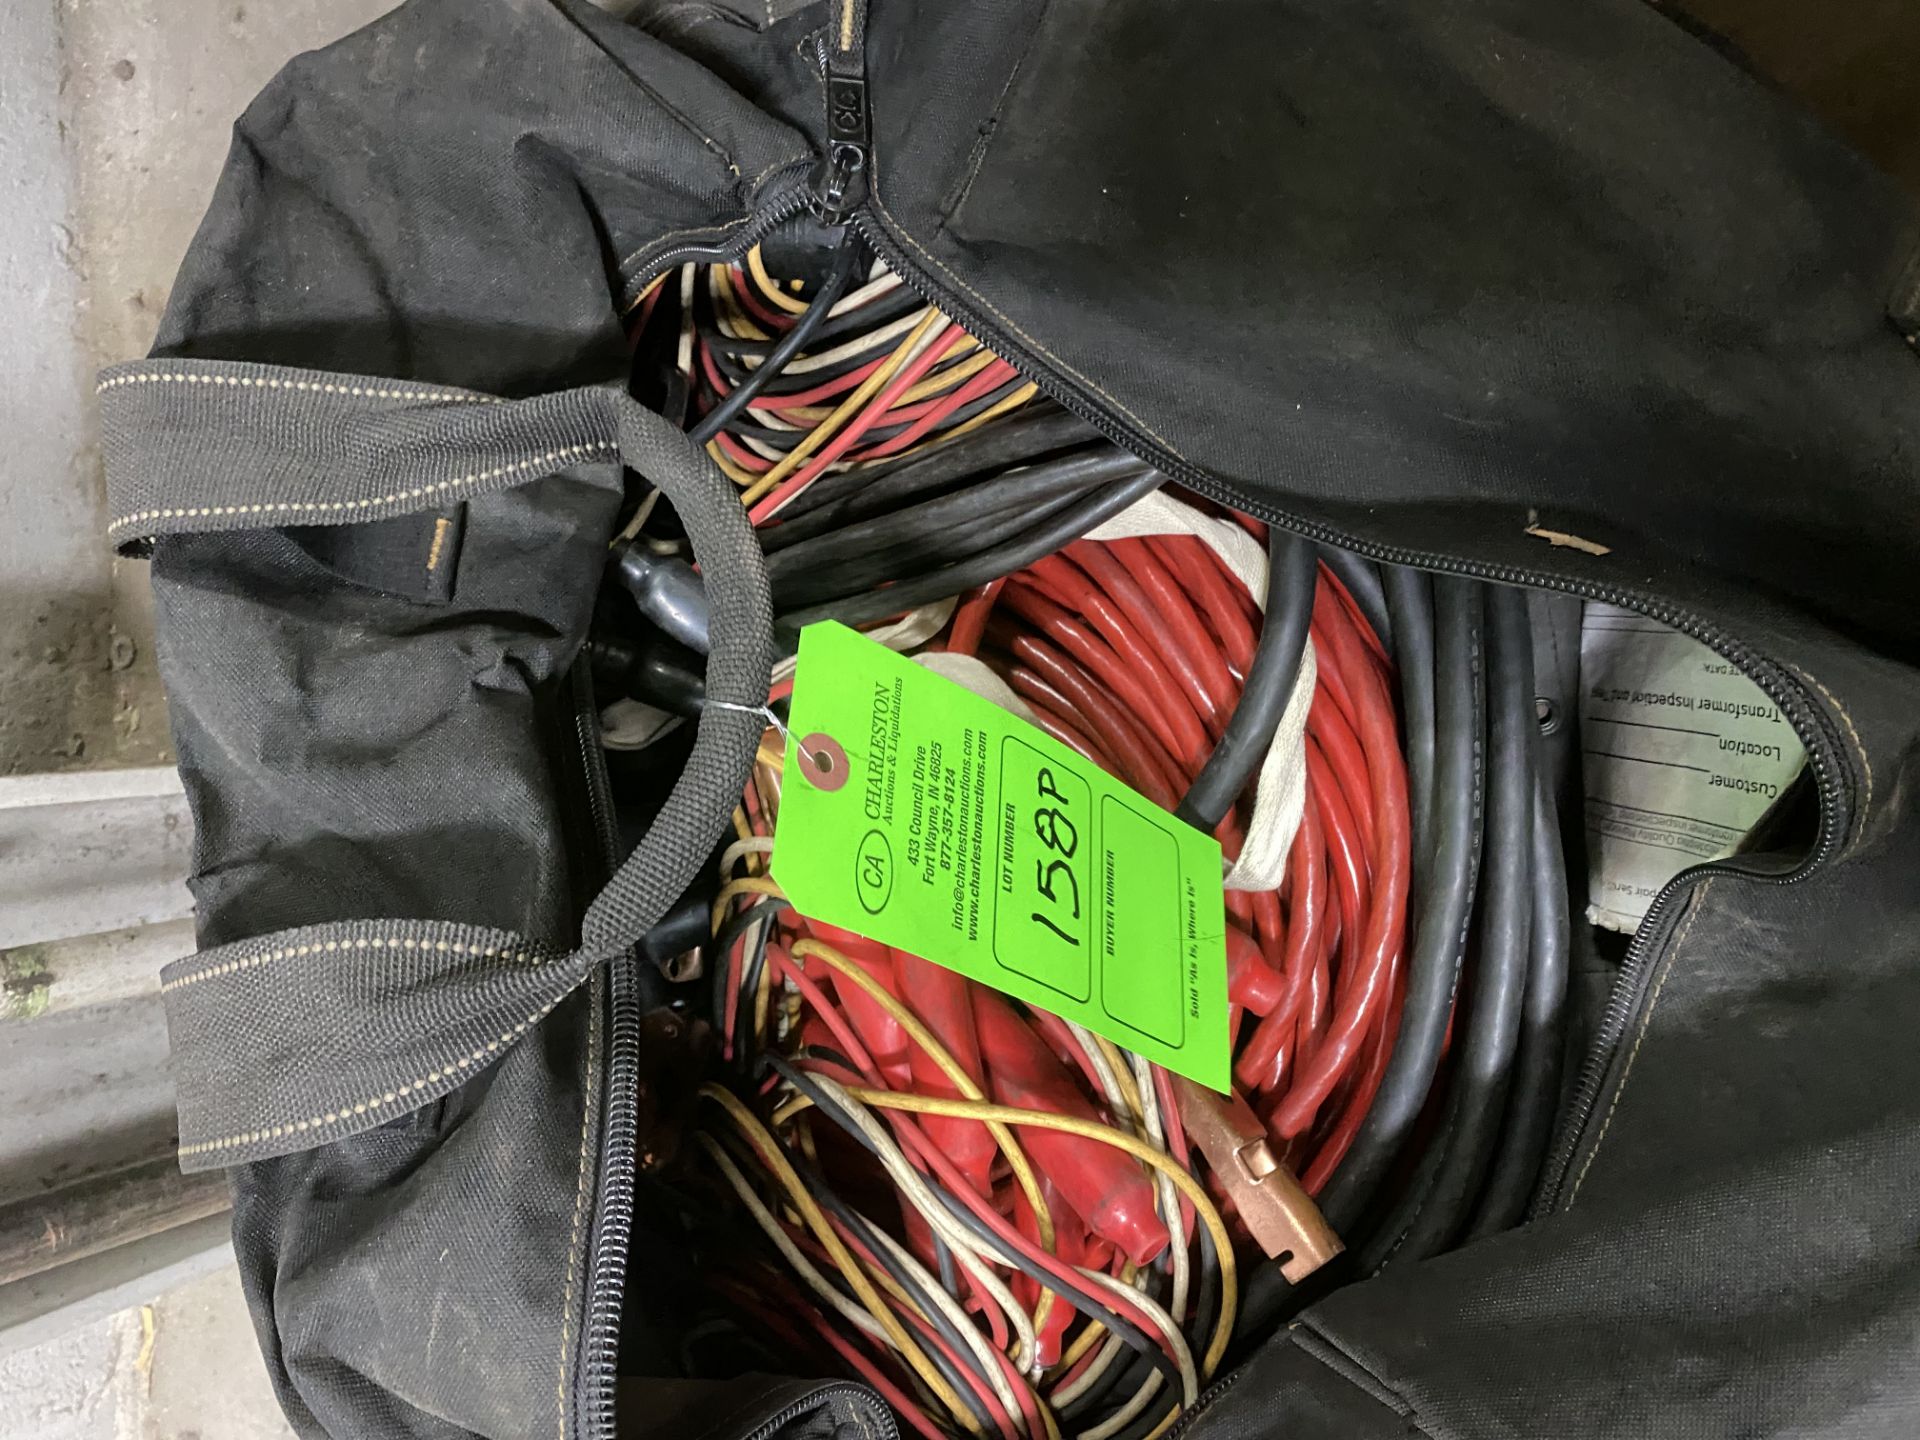 BAG OF TEST CORDS (THIS ASSET WILL BE RELEASED UPON CONFIRMATION OF EHS TEST RESULTS)